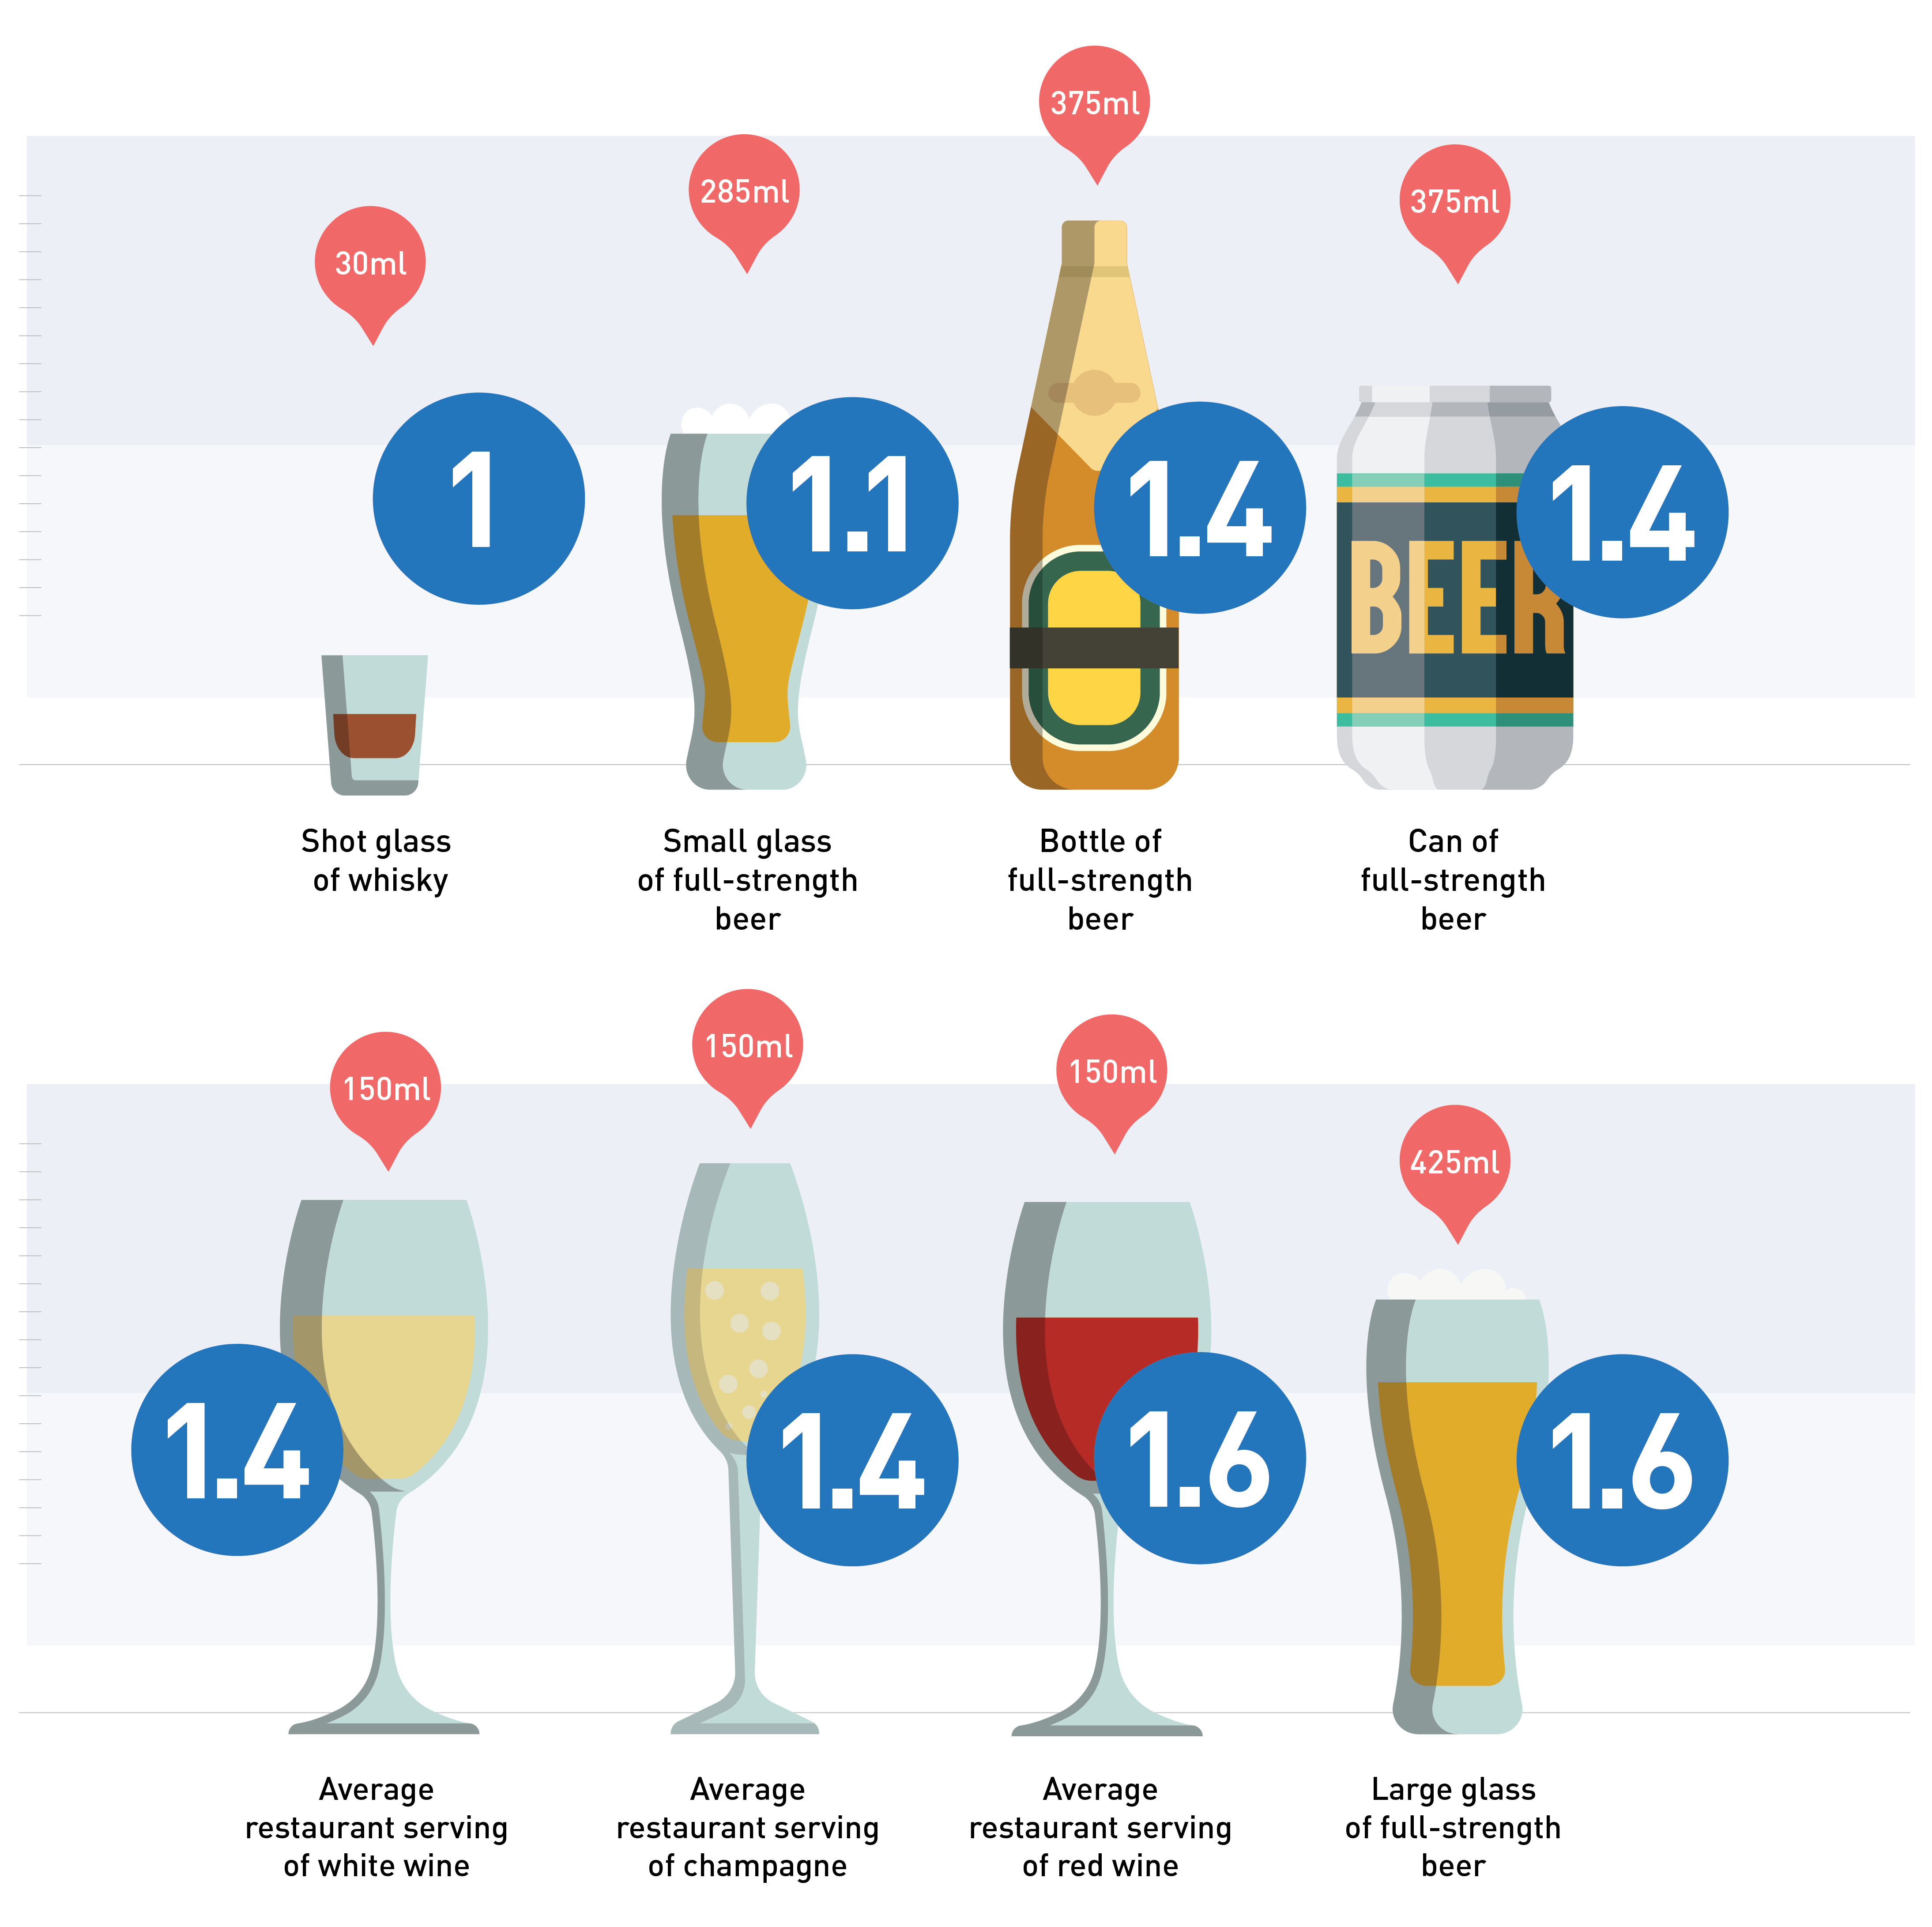 How Many Drinks Per Day and Week is Too Much?